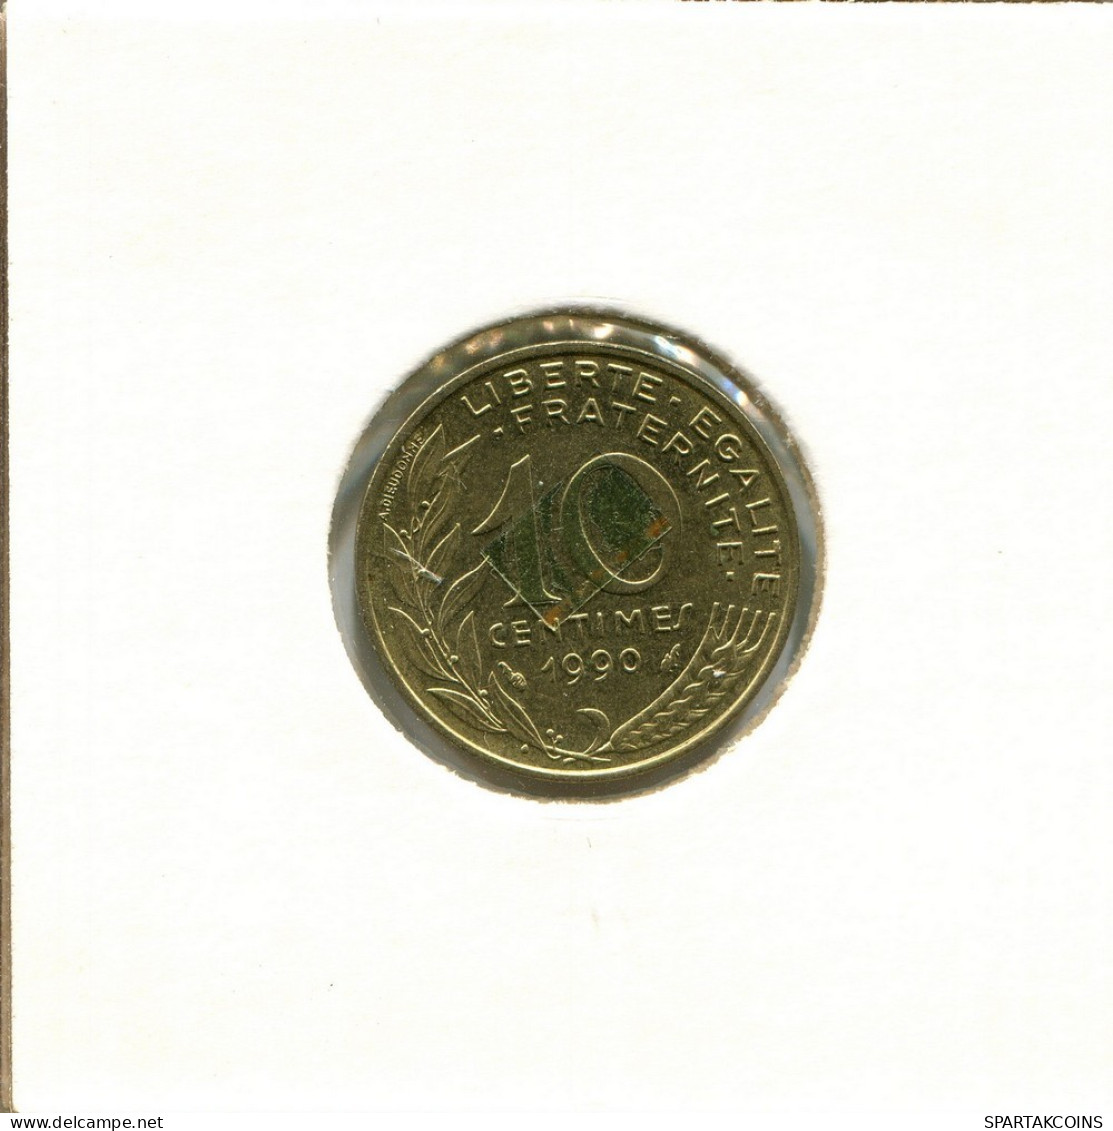 10 CENTIMES 1990 FRANCE Coin #BB468.U.A - 10 Centimes